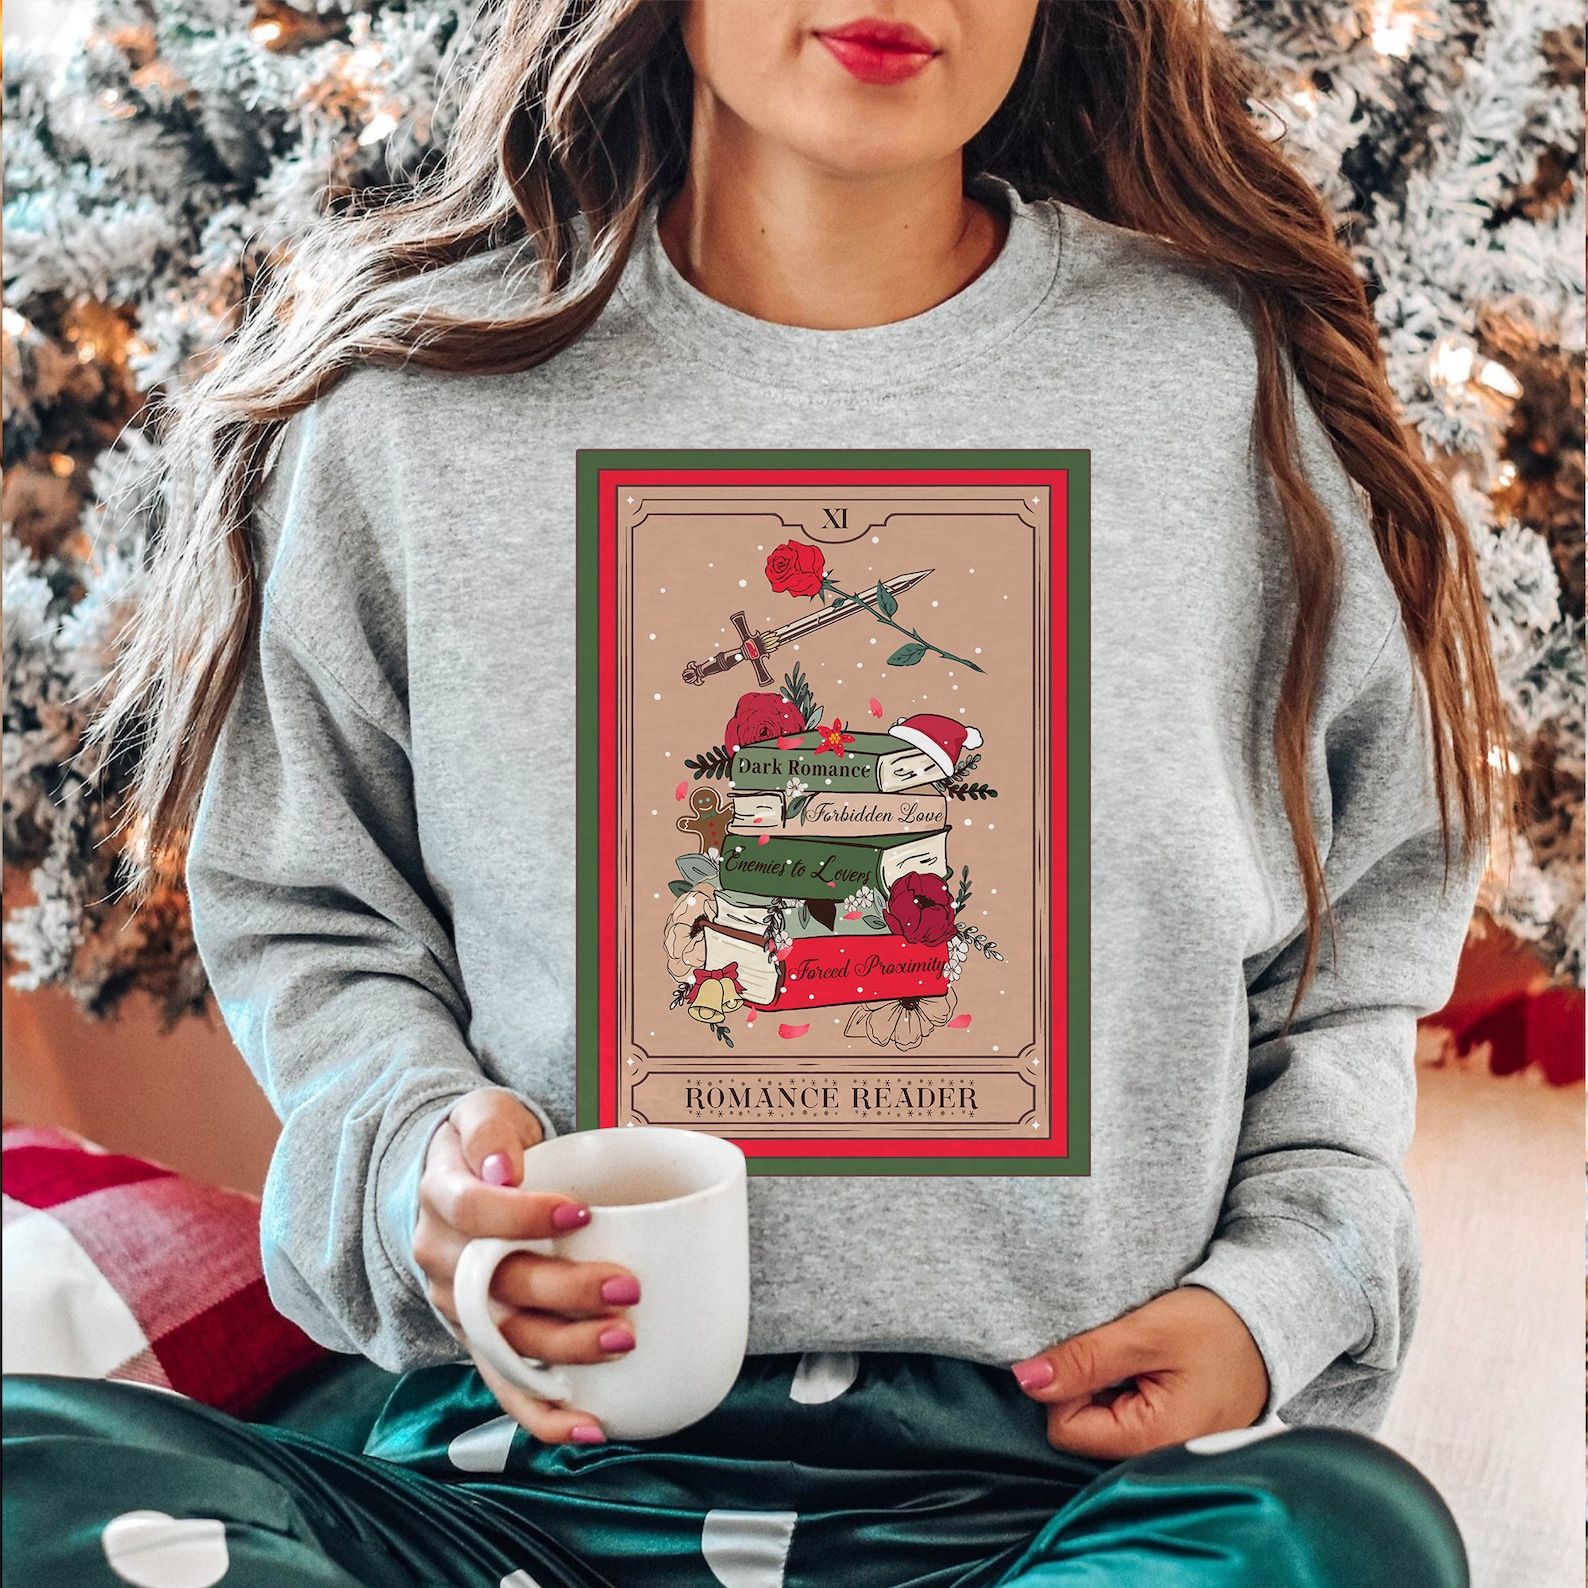 a gray sweatshirt with a tarot card that reads "romance reader" and a stack of books with various tropes on their spines, covered in in snow and with various holiday symbols